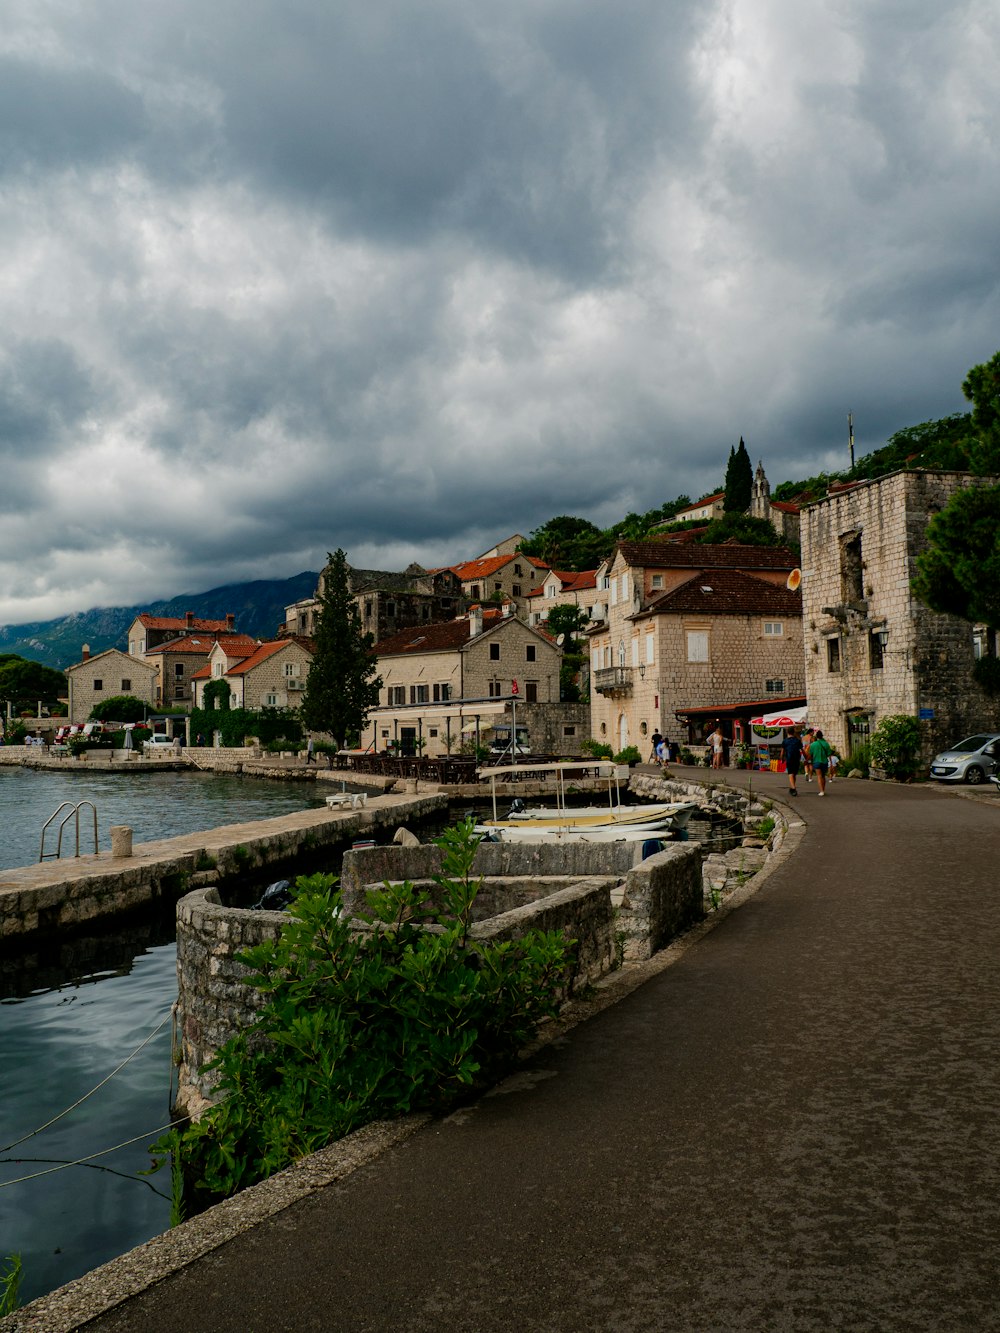 a view of a river and a town with a cloudy sky